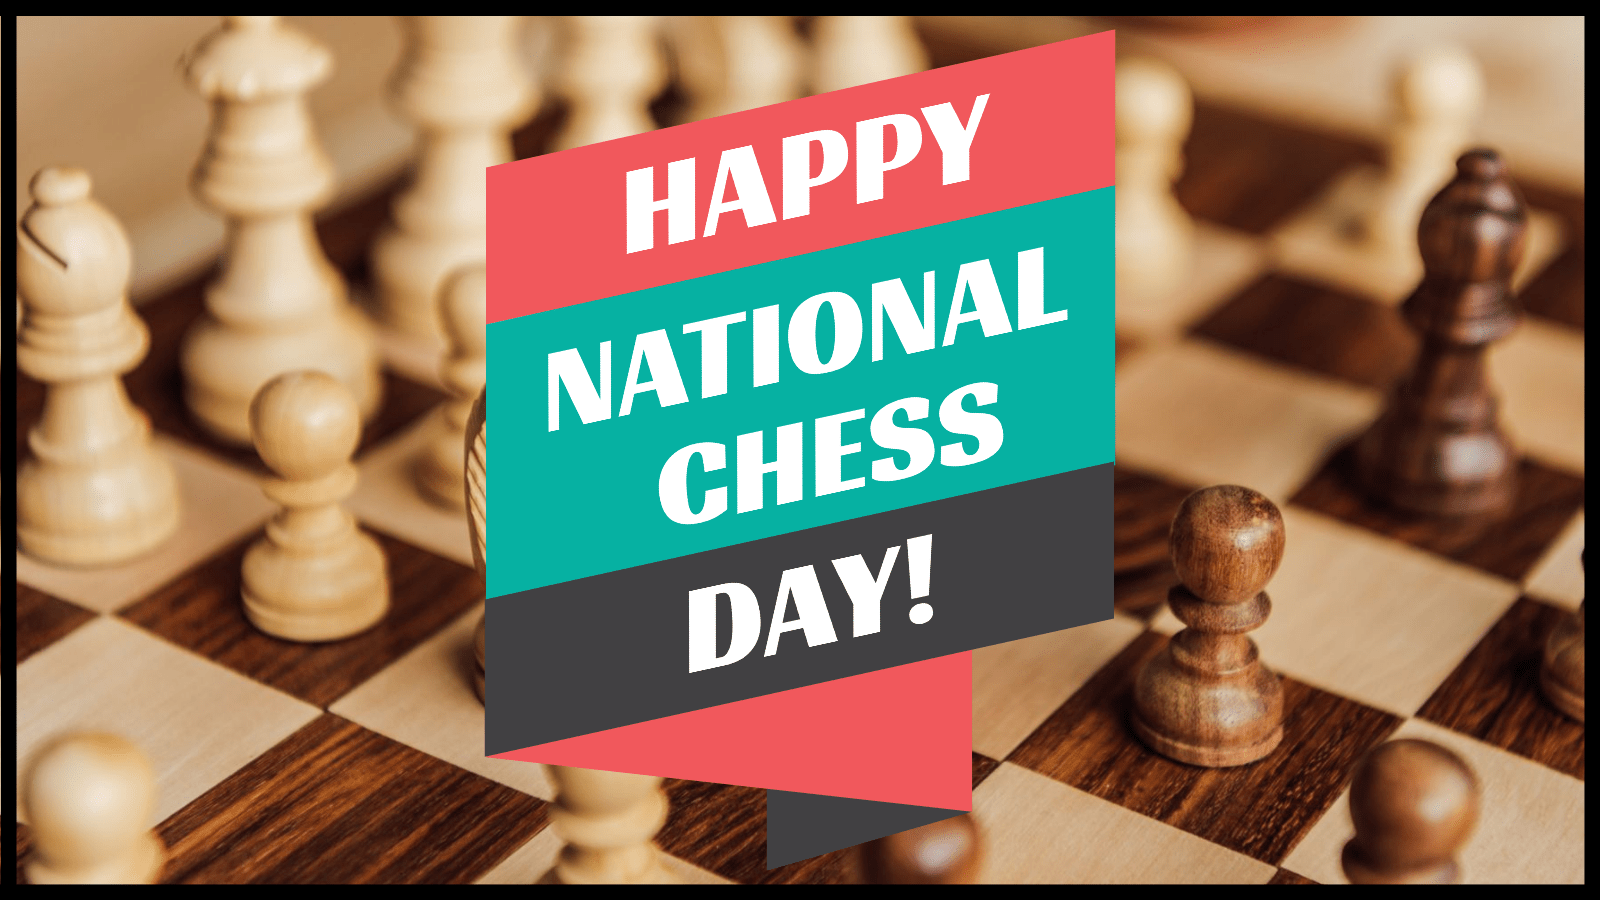 Pin on AMERICAN CHESS DAY